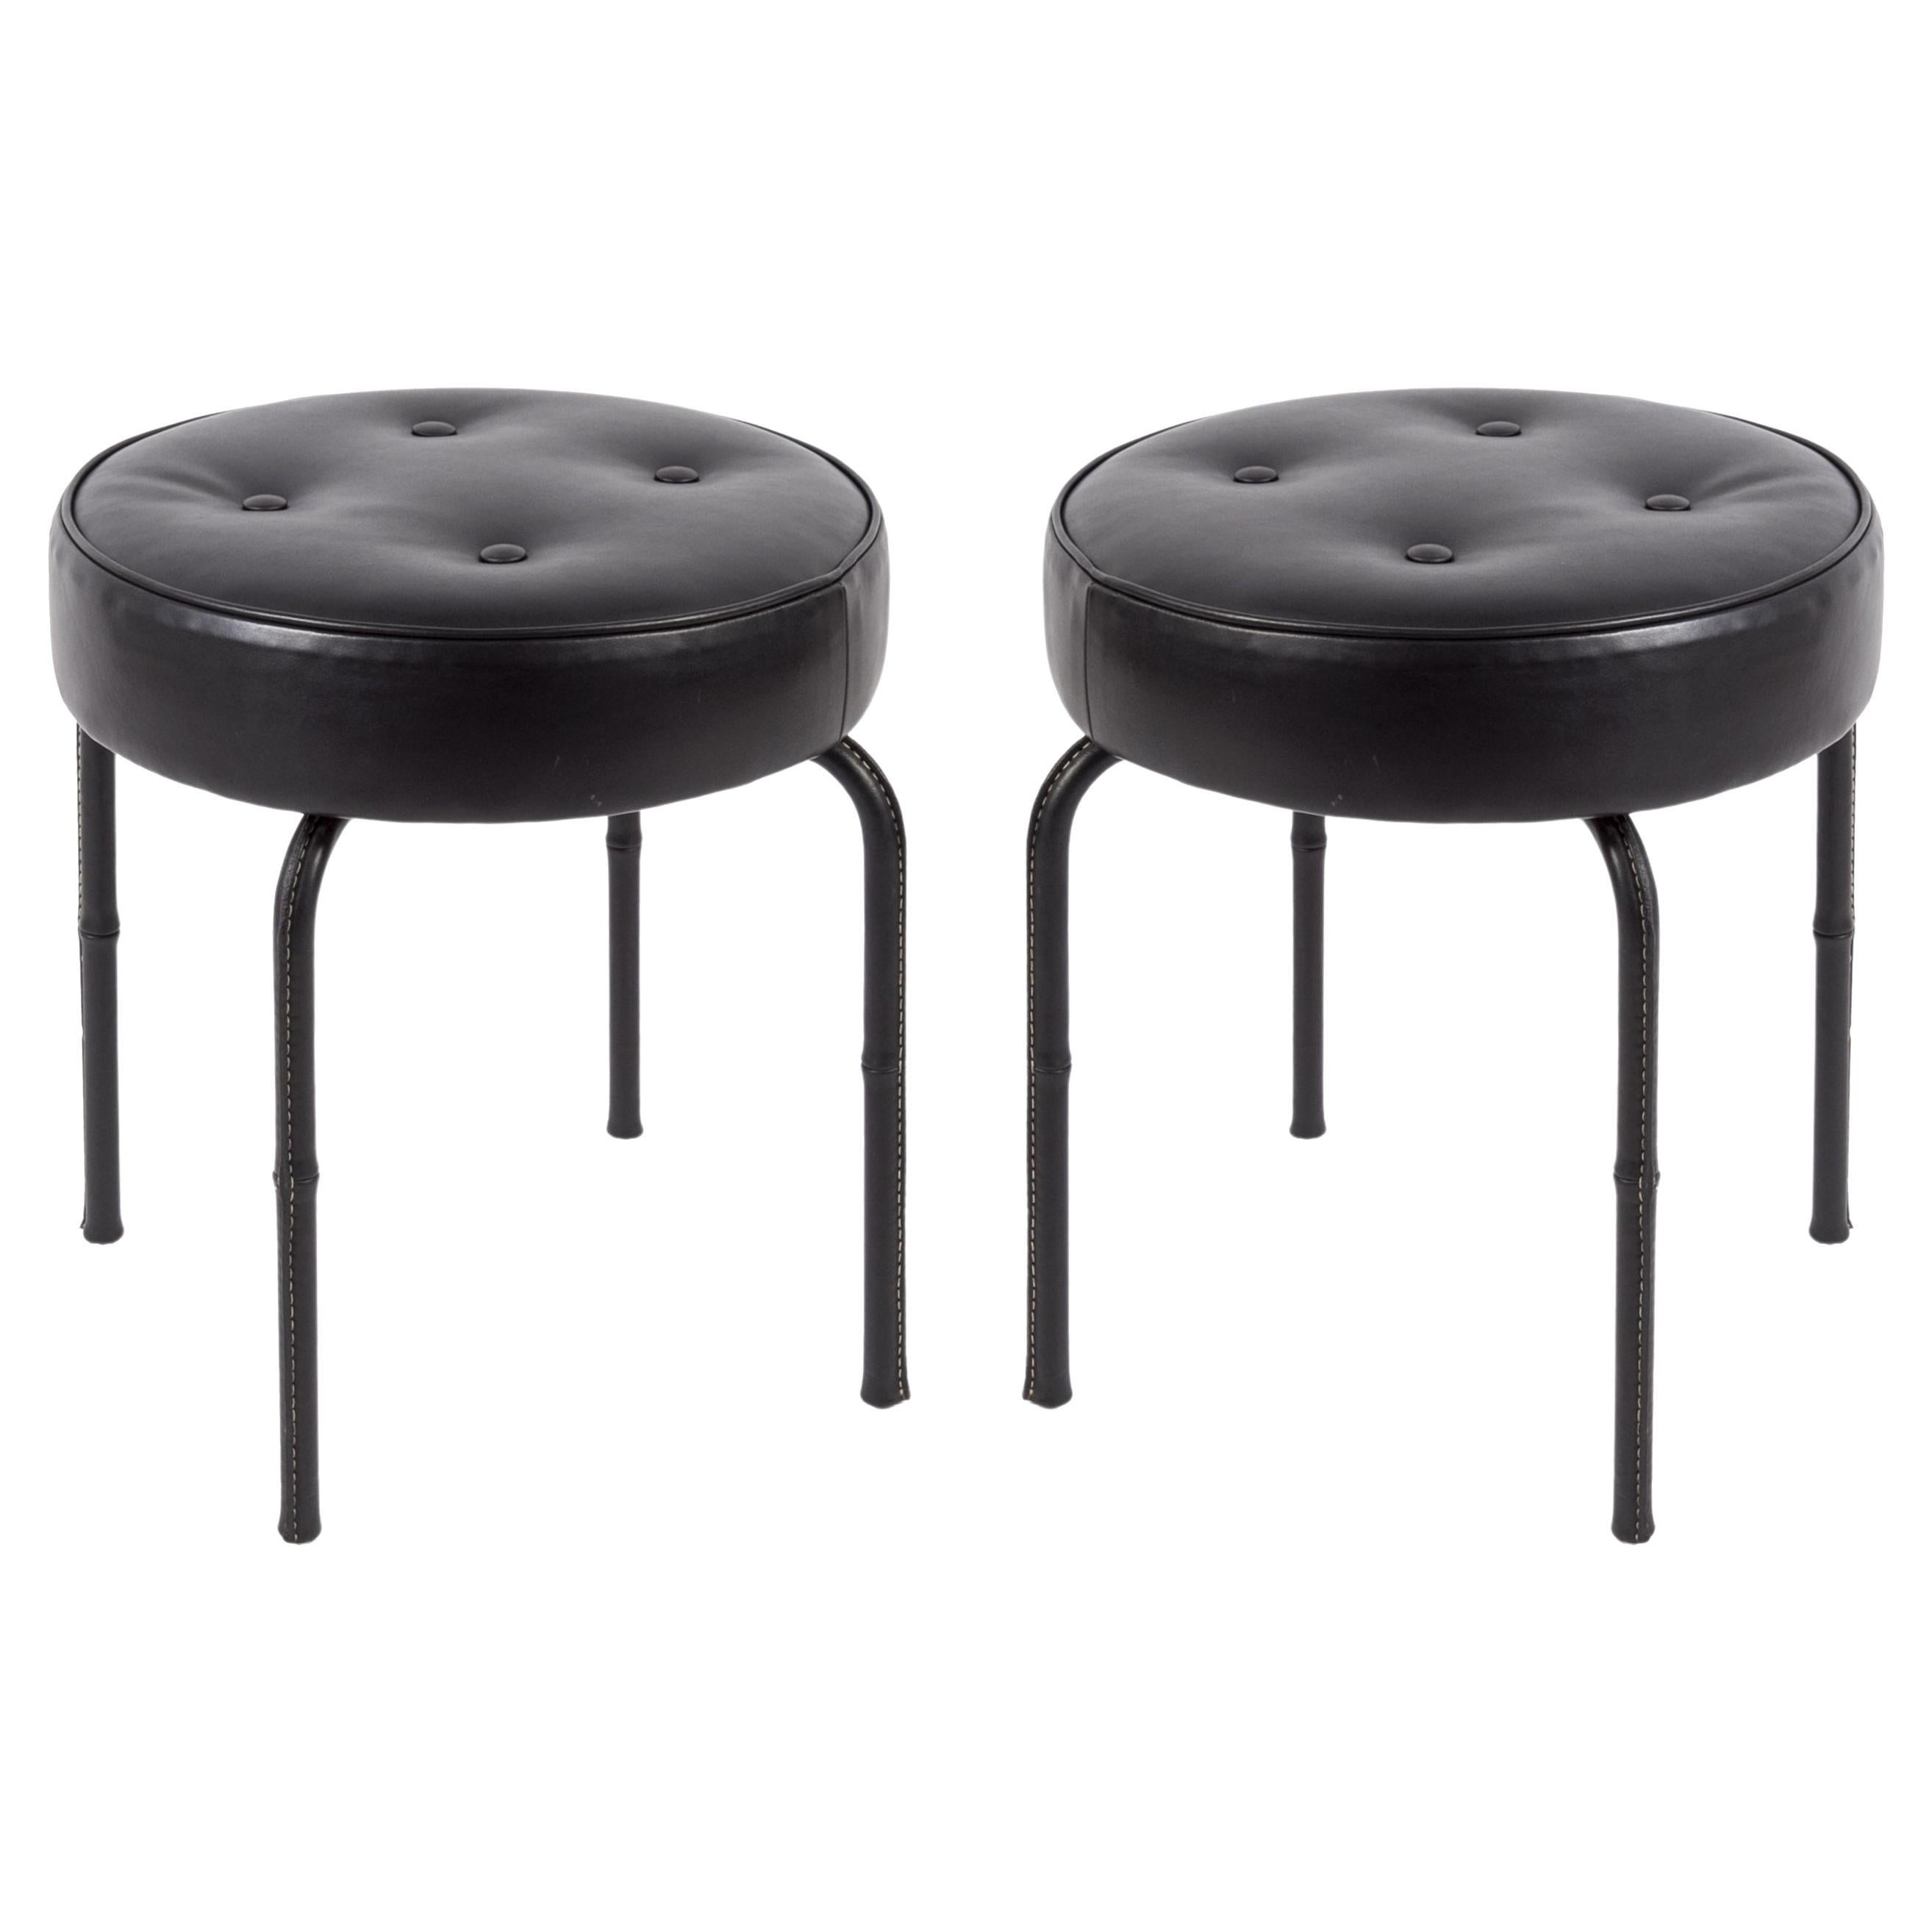 1950's Pair of Stitched Leather Stools by Jacques Adnet